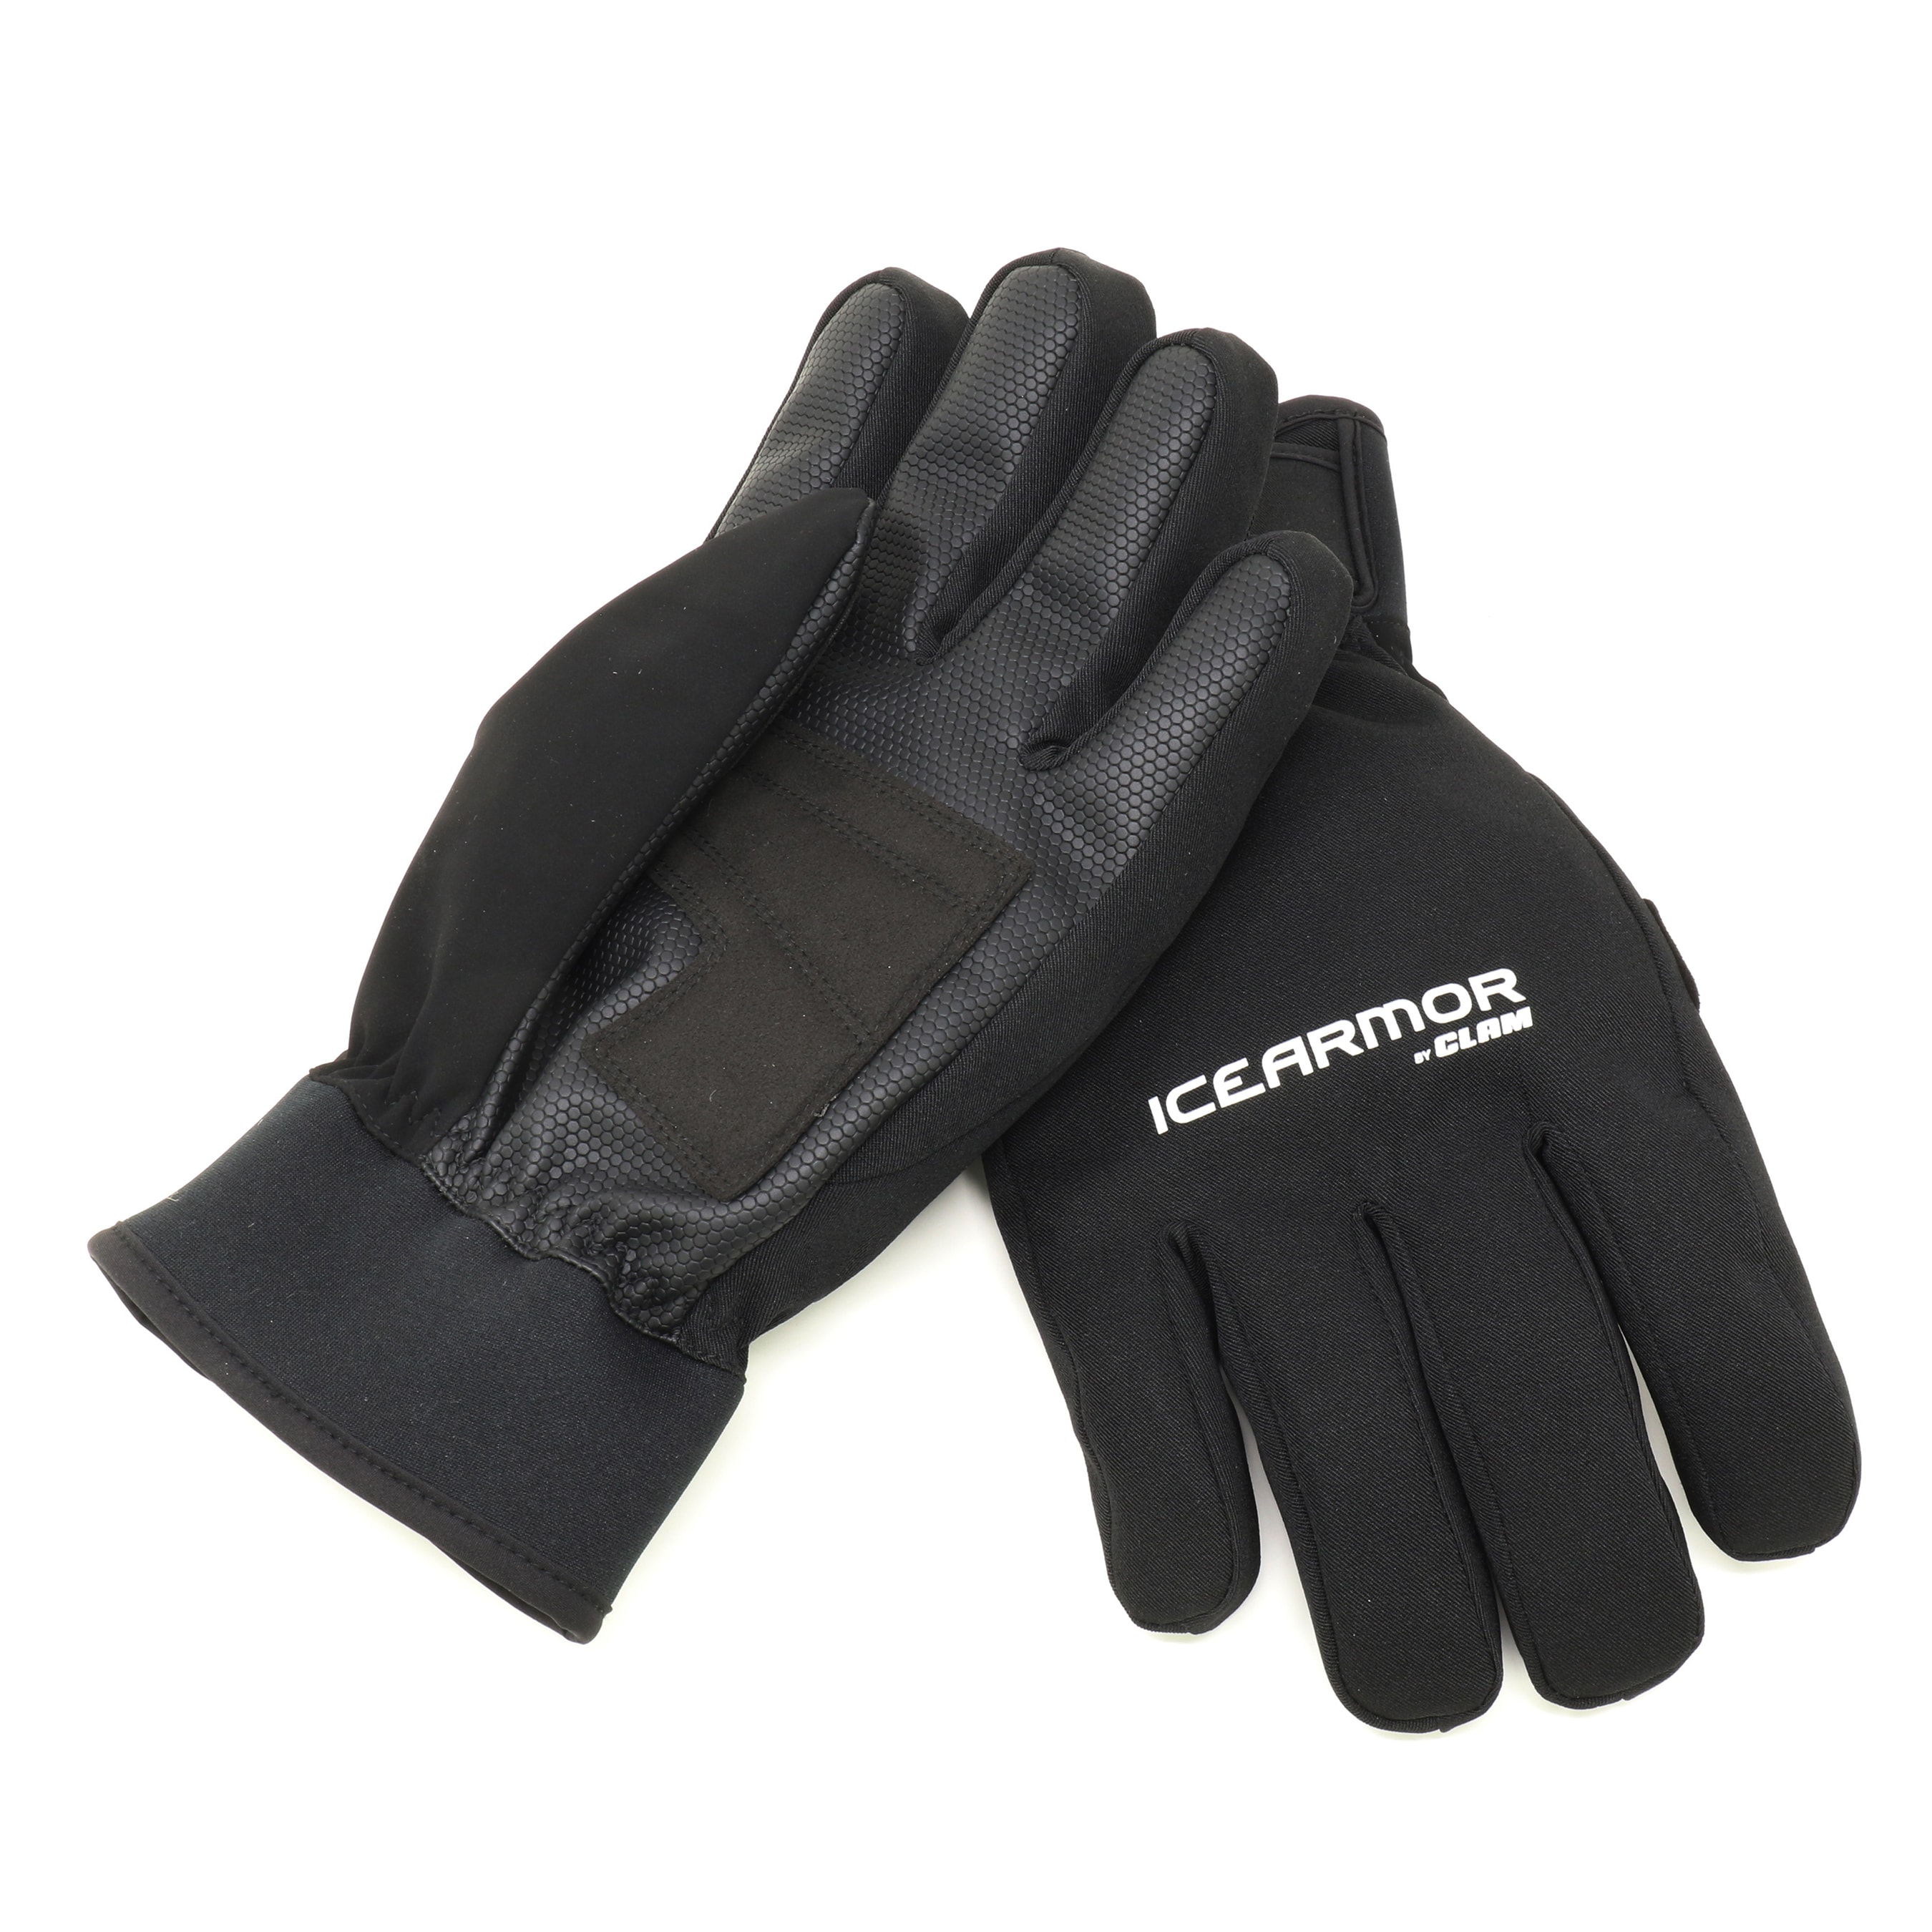 Clam Outdoors Renegade Ice Fishing Glove Small Black in the